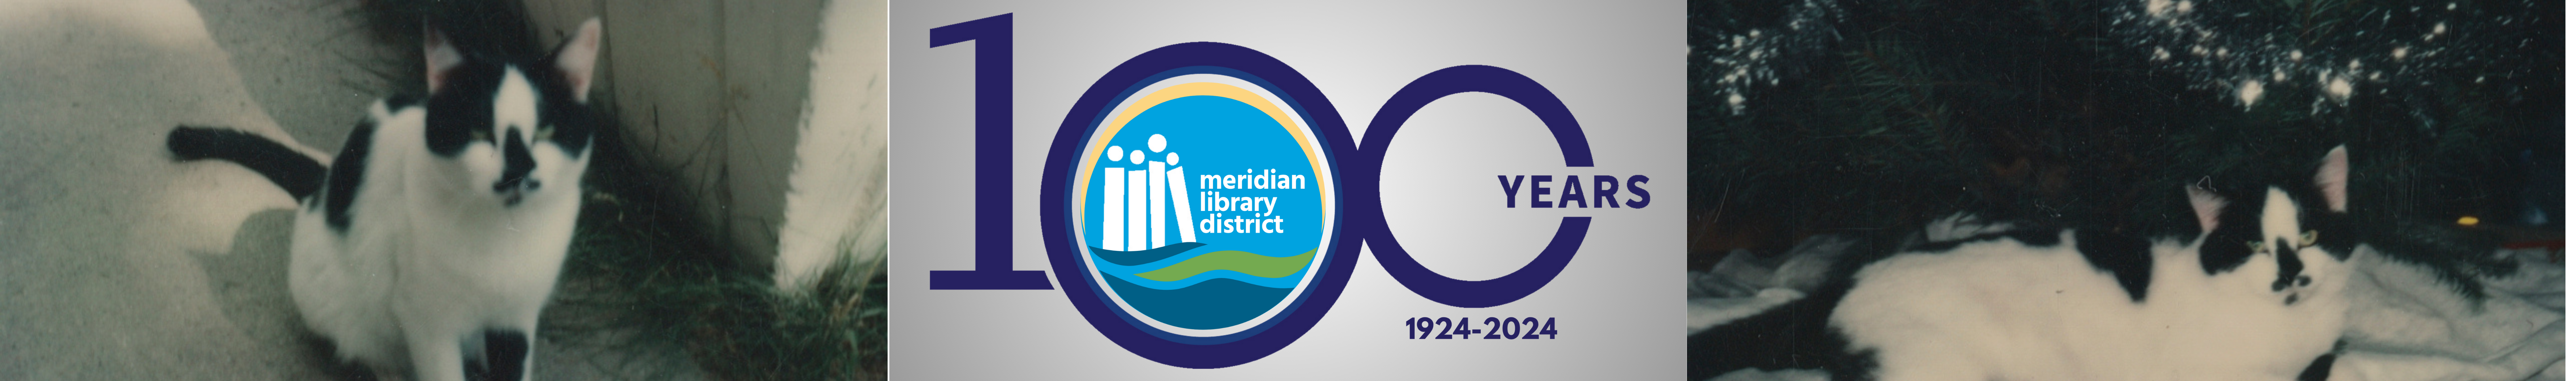 Meridian Library District centennial logo with pictures of Figaro, the library cat.